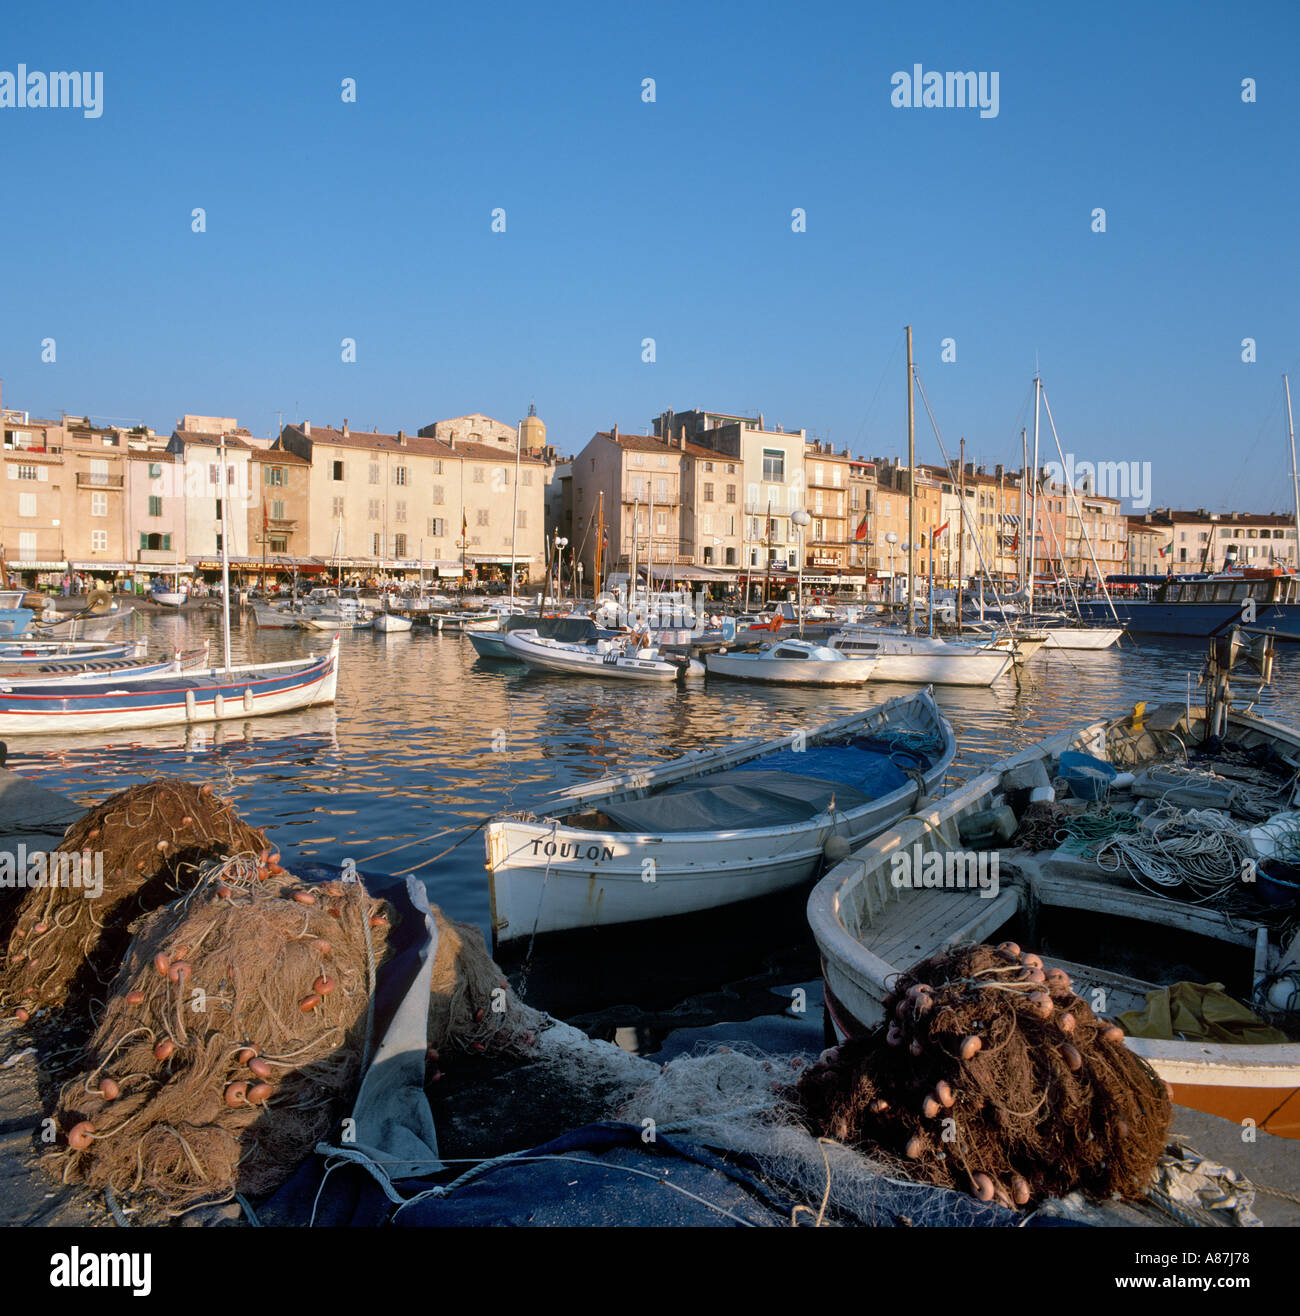 Early evening in the Old Harbour, St Tropez ,French Riviera, France Stock Photo